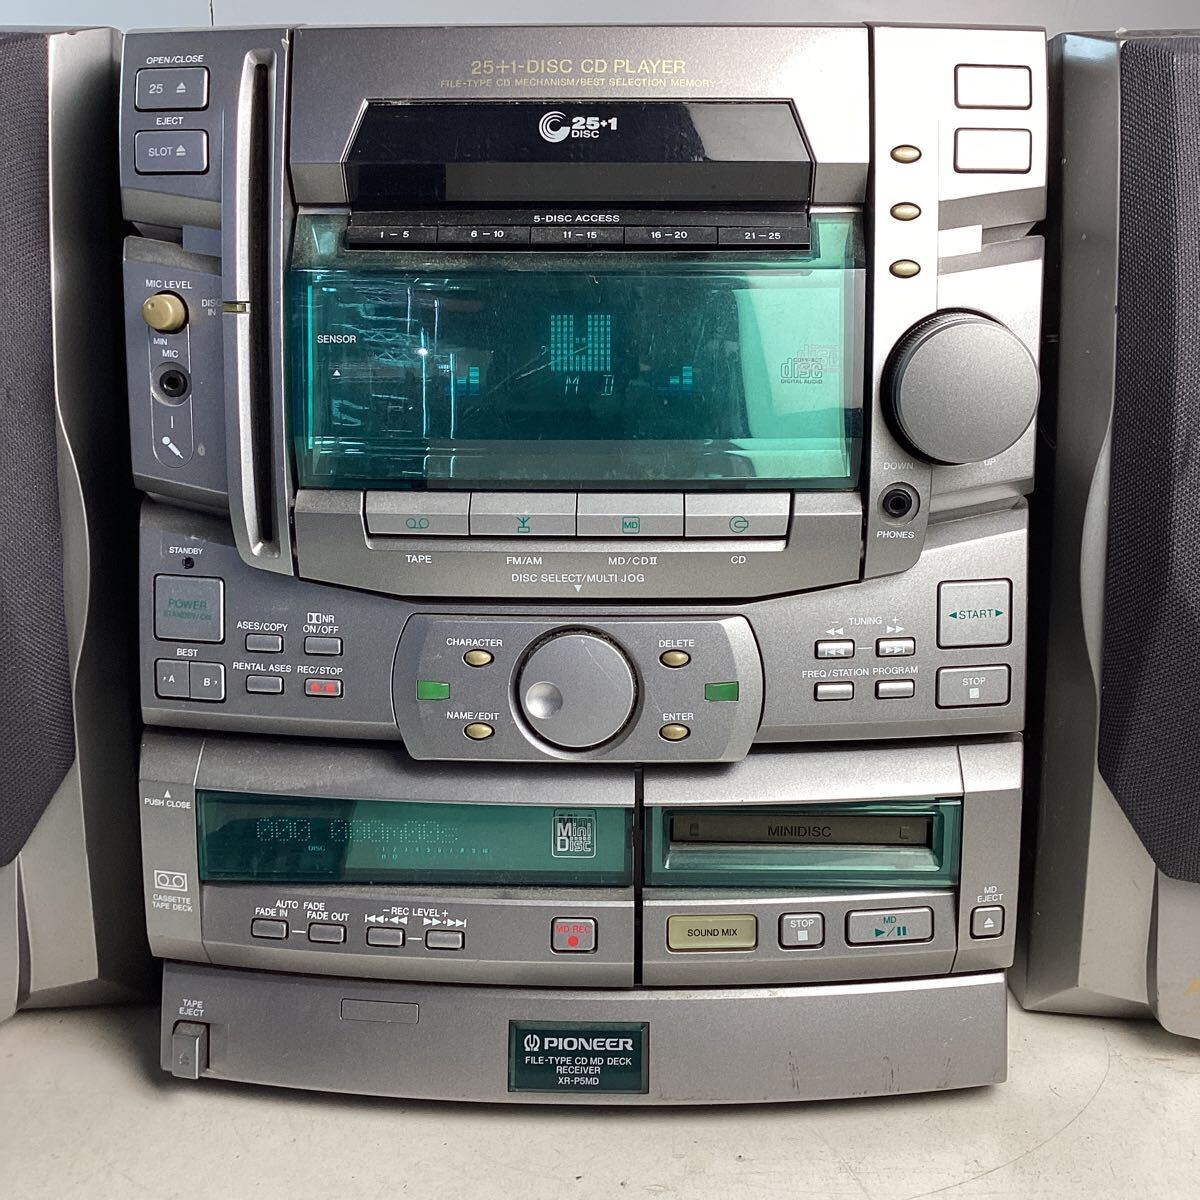 k5320 PIONEER XR-P5MD 25 sheets CD changer +1CD player MD cassette tape radio Pioneer system player player operation verification settled used 